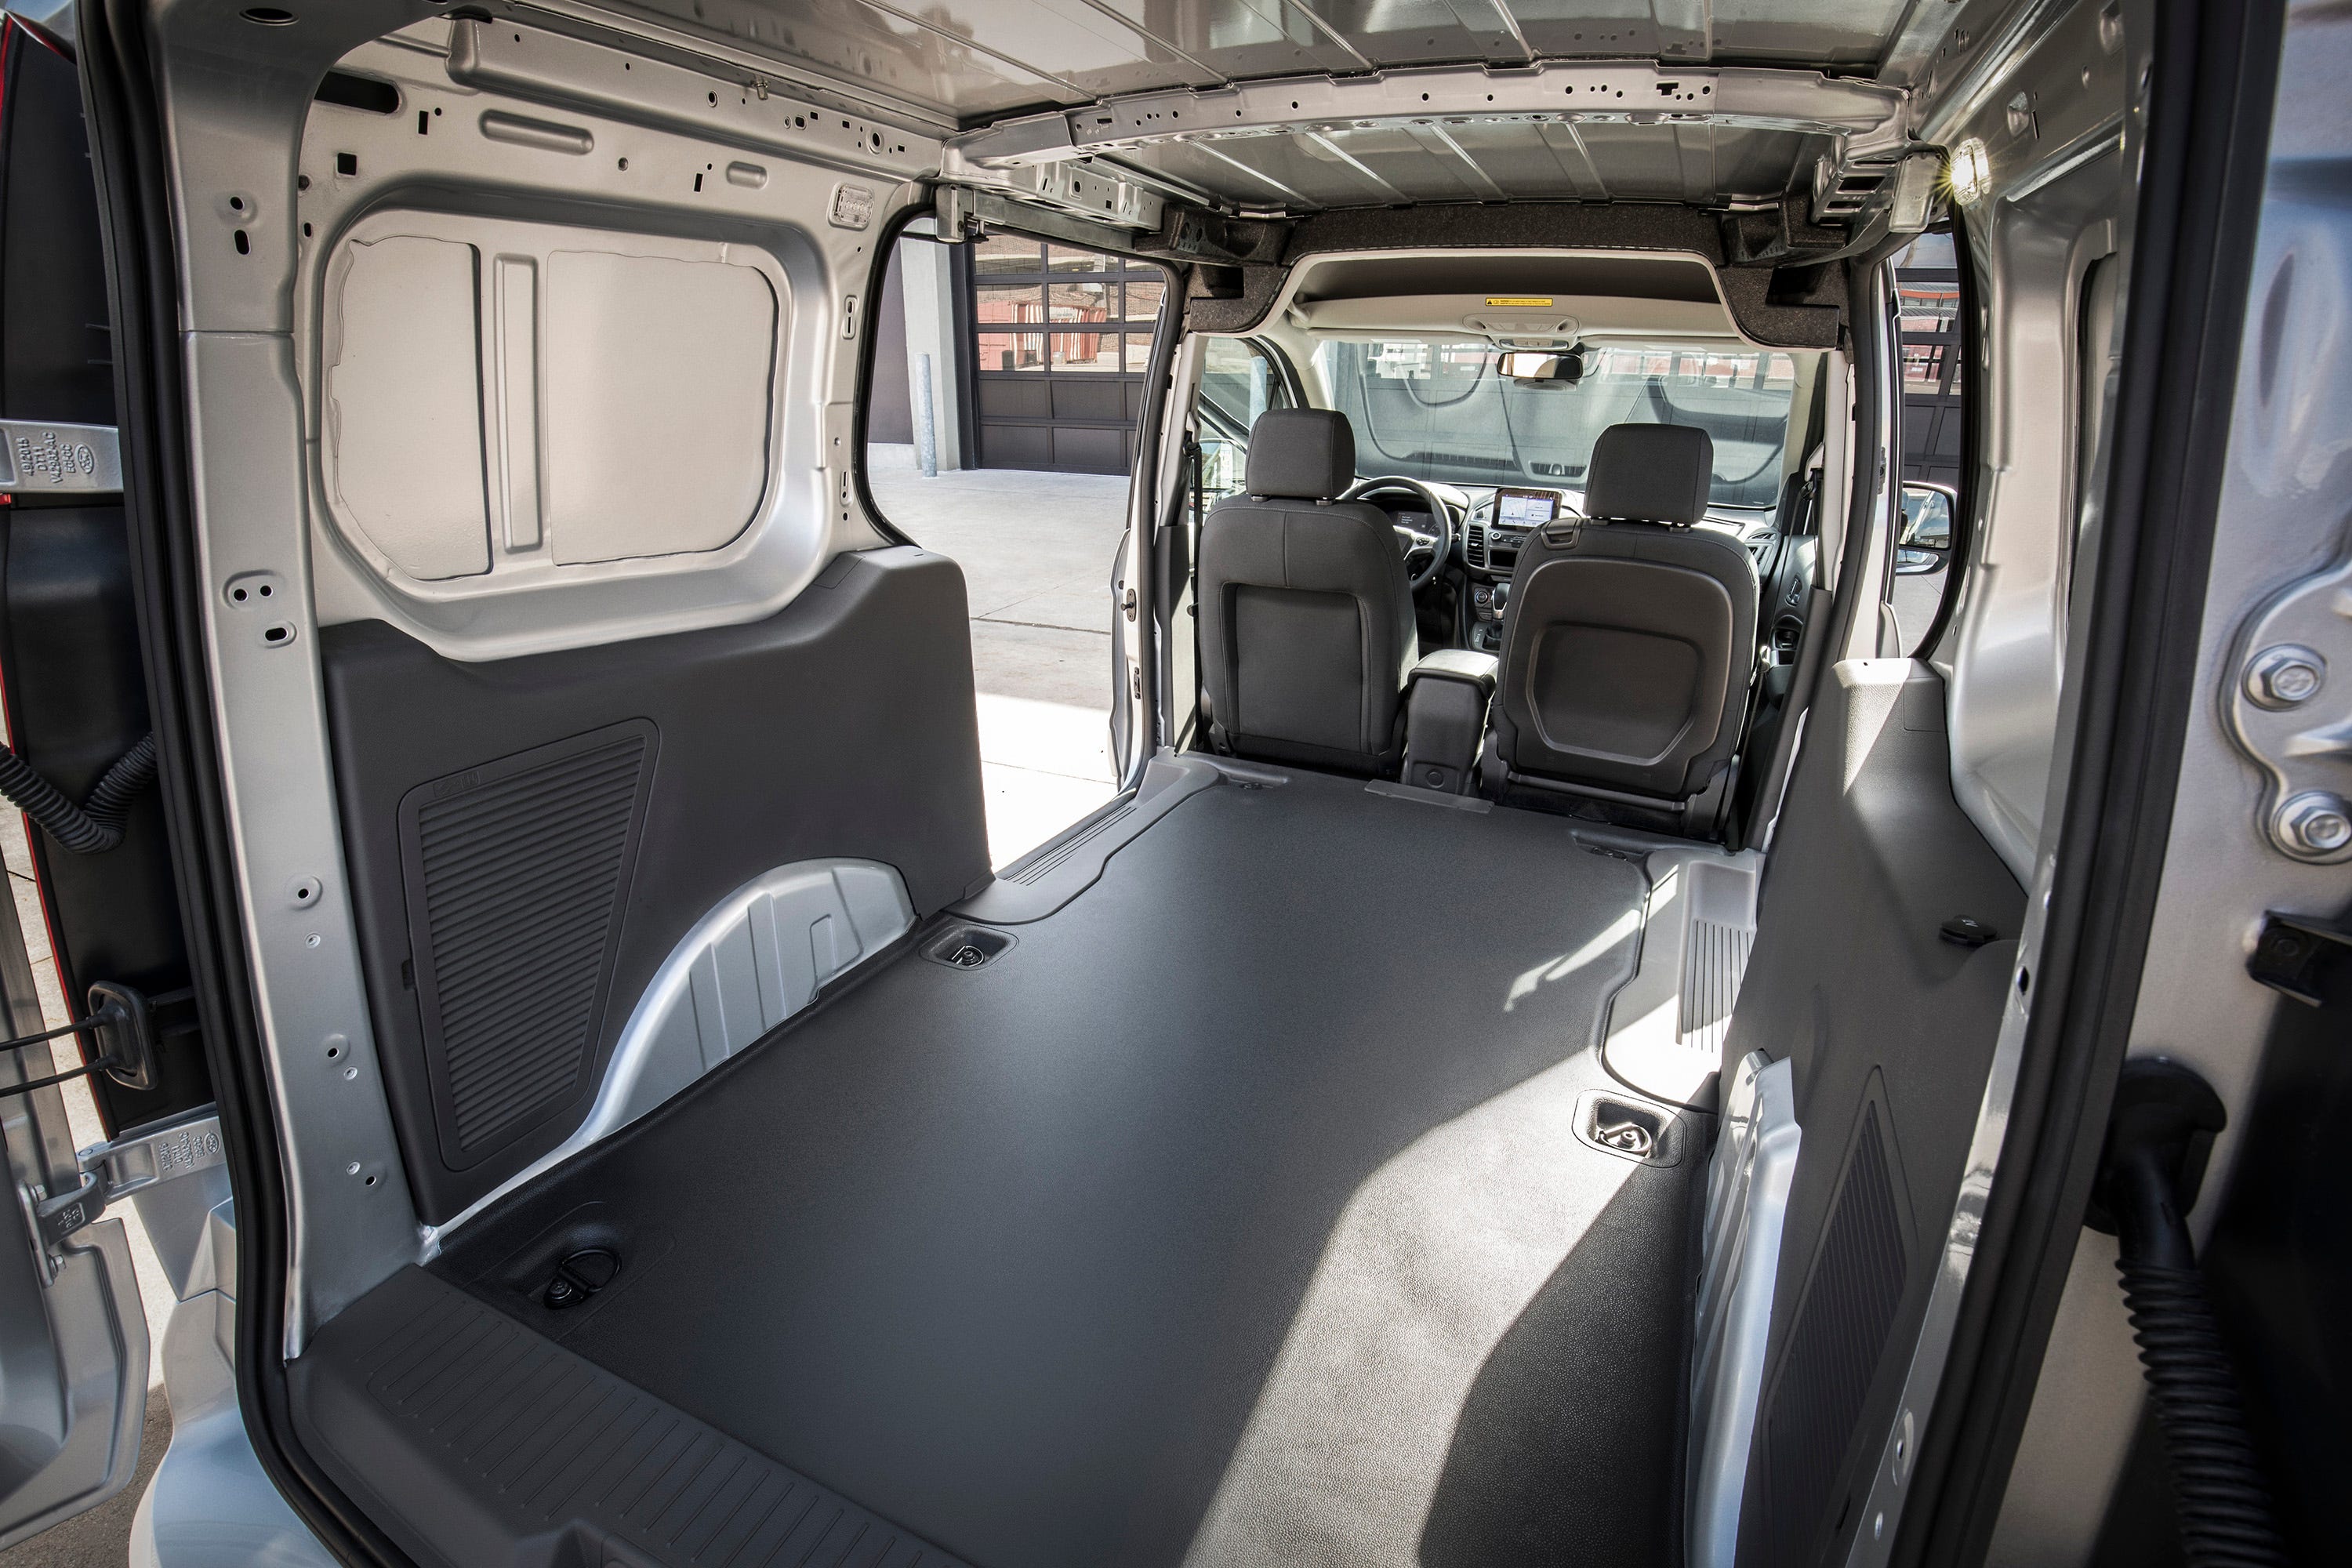 2019 ford transit connect cargo van for sale